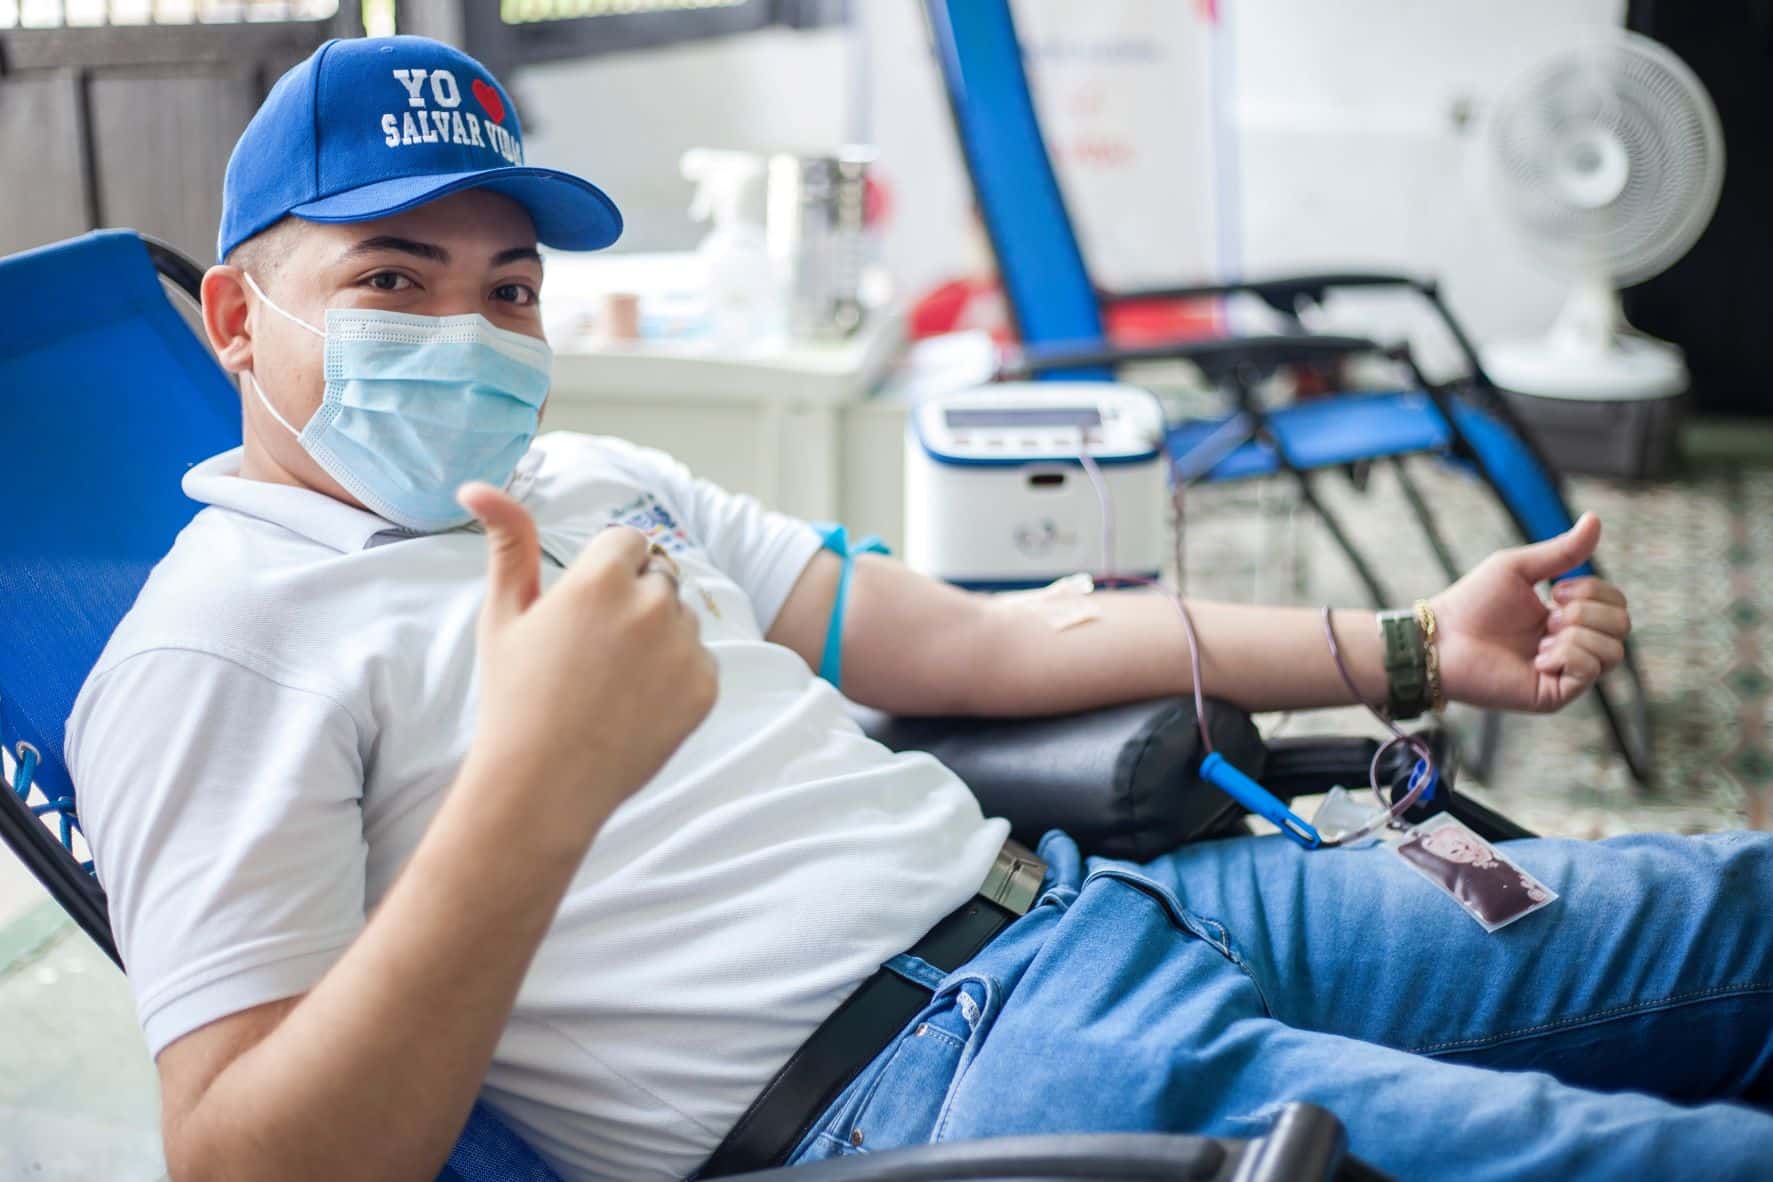 man with an iv in arm giving a thumbs up